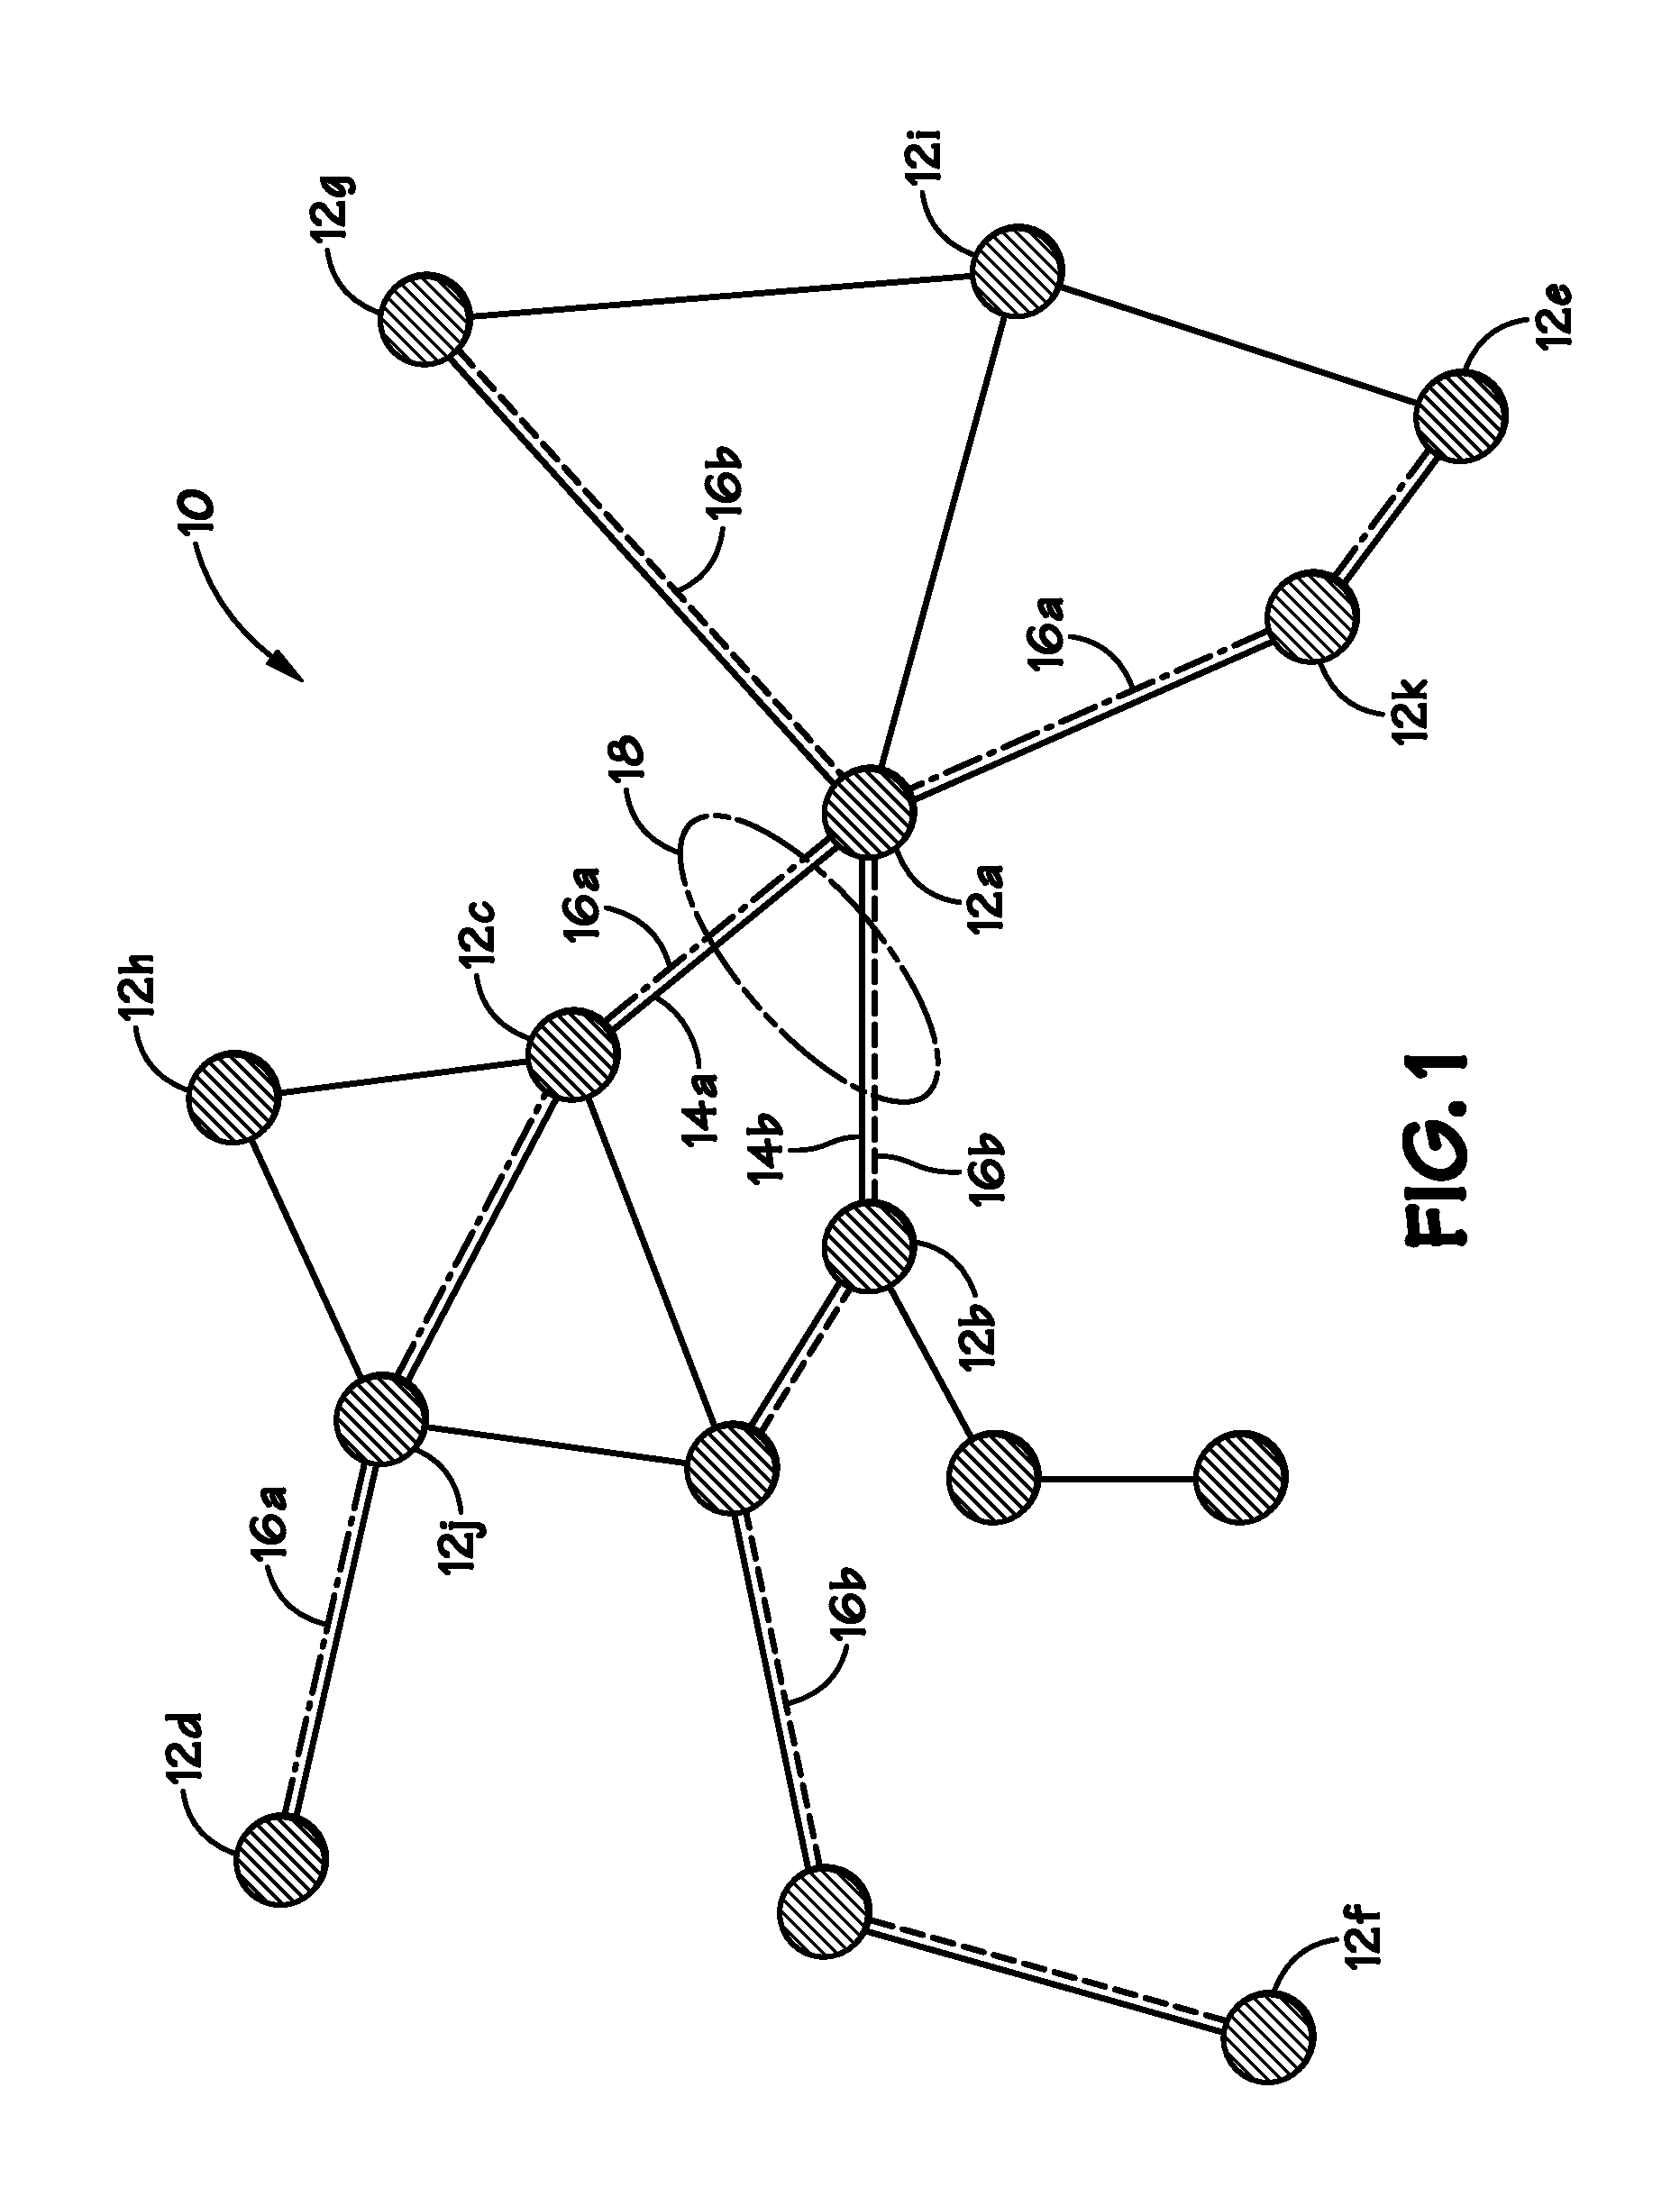 Division free duplexing networks